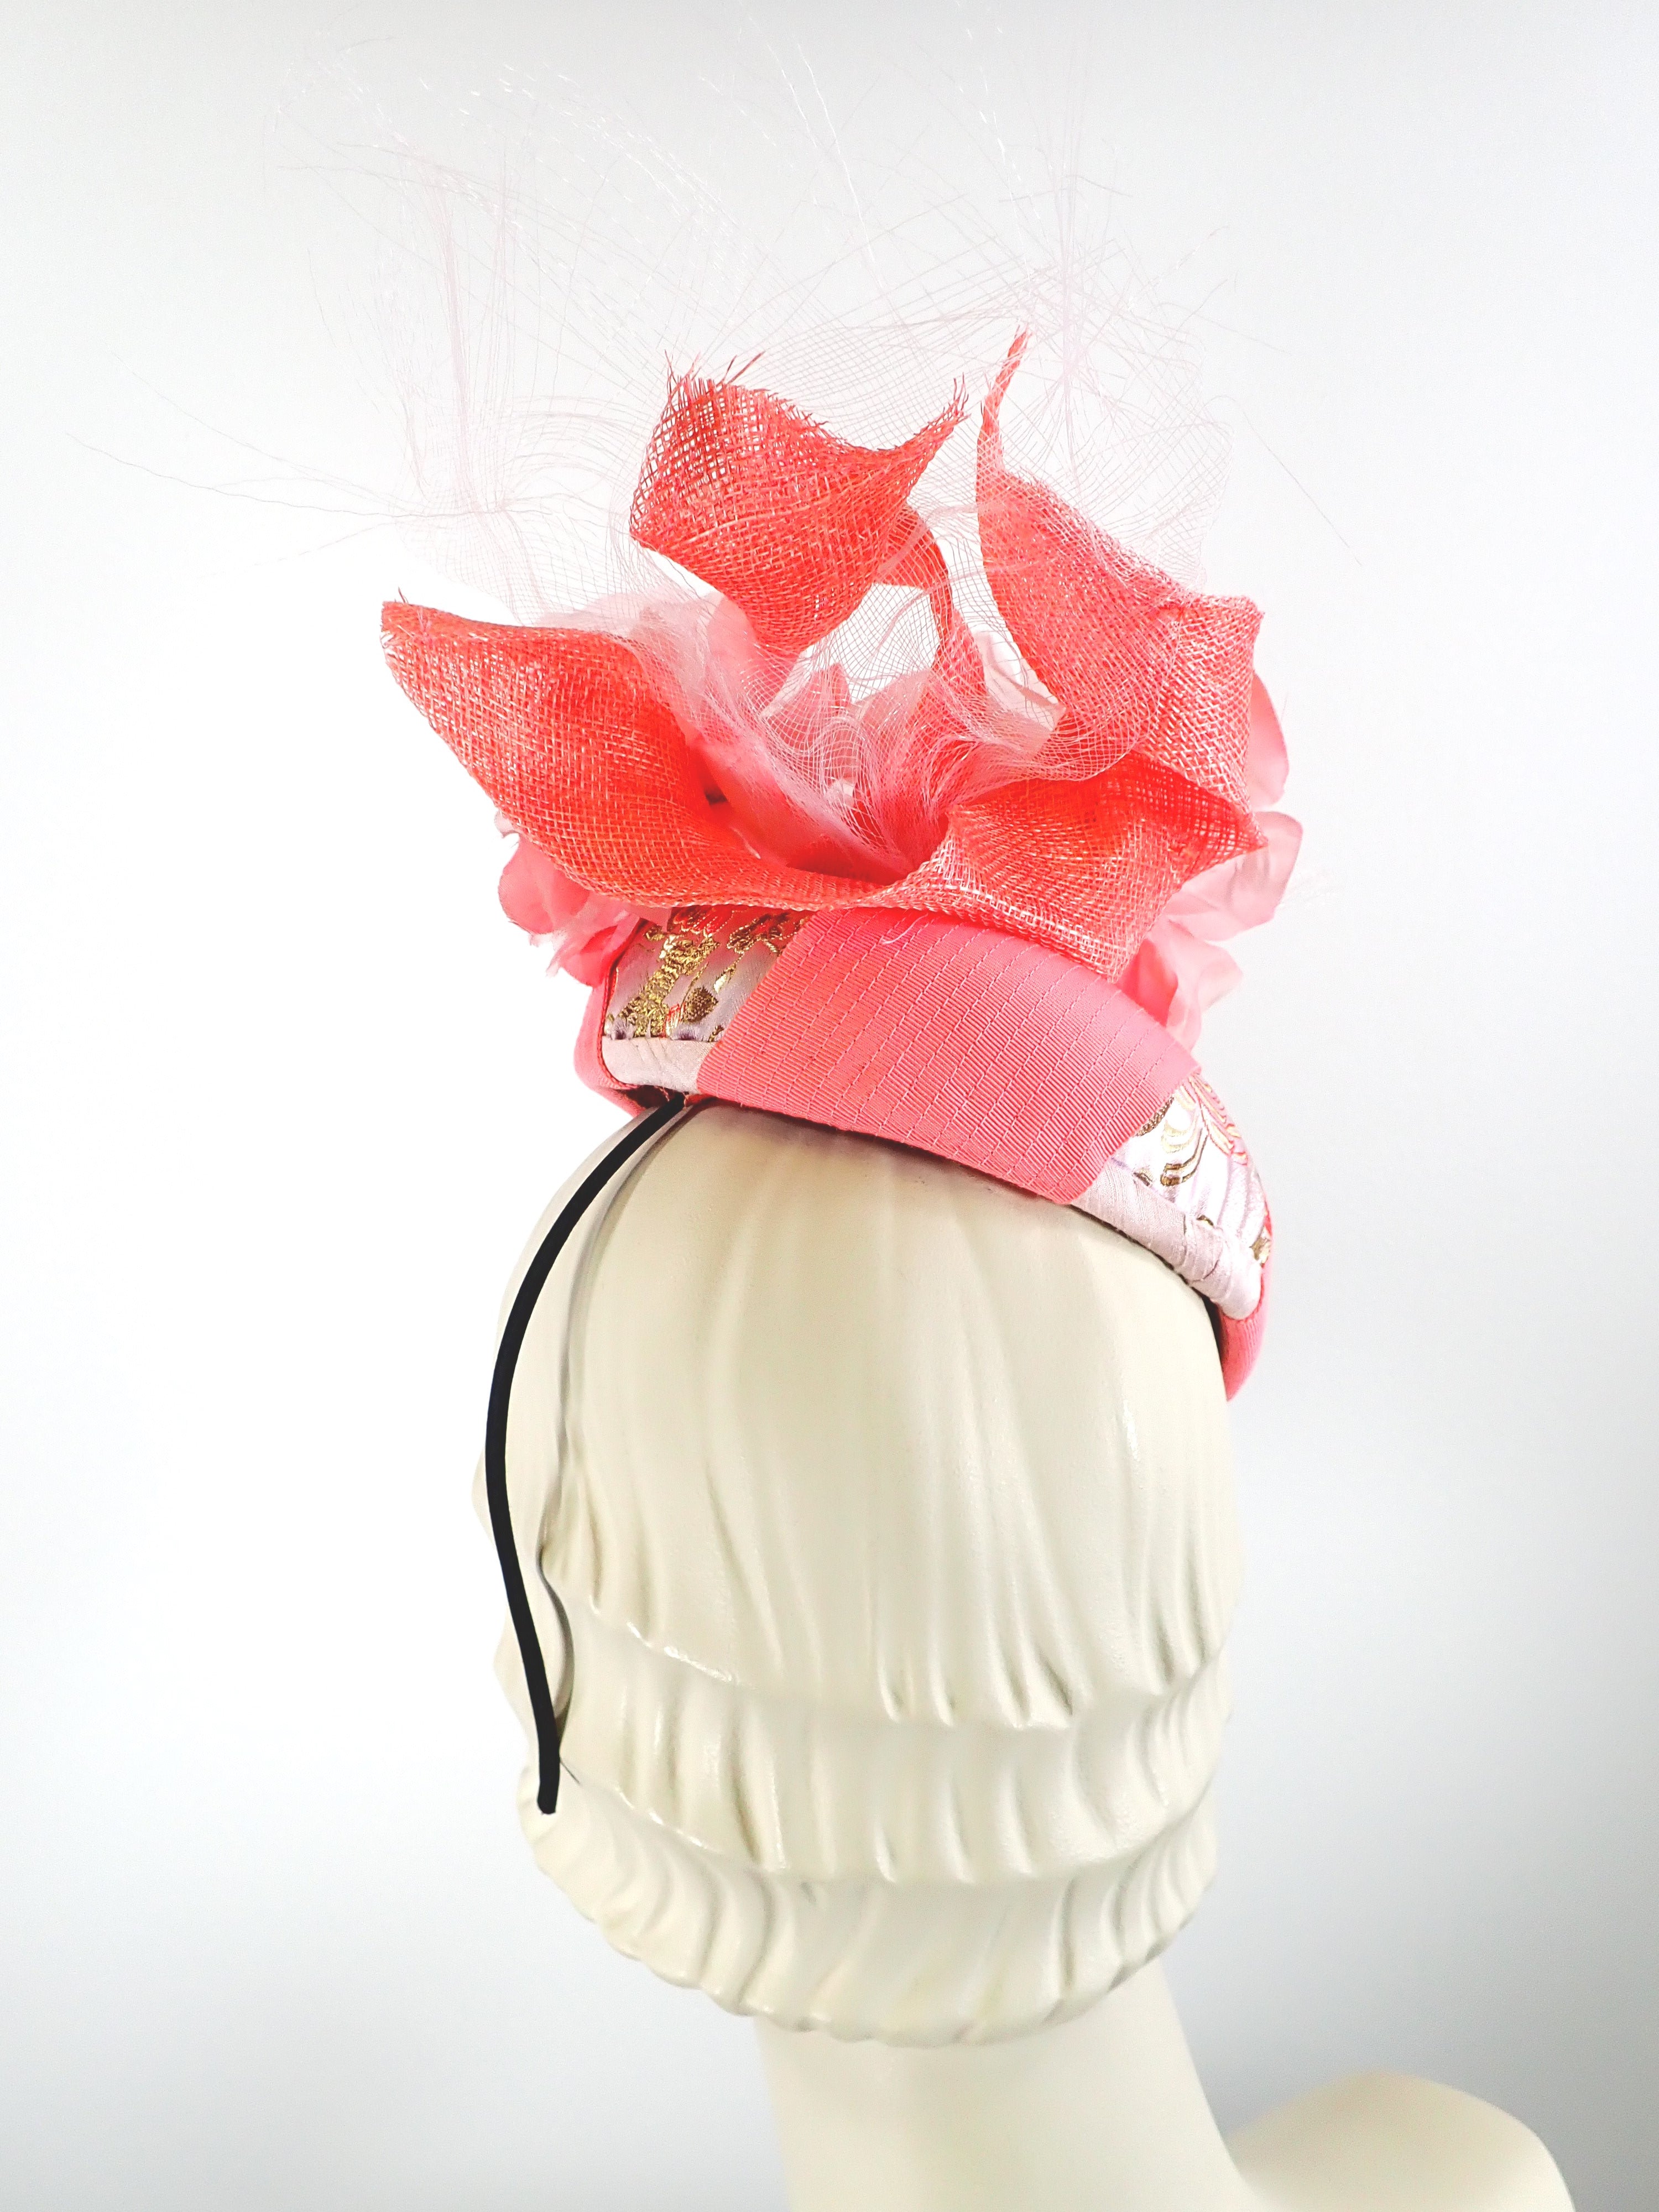 Women's Coral, and Pale Pink Ribbon and Sinamay Fascinator Hat for Kentucky Derby - Summer Fascinator for Church